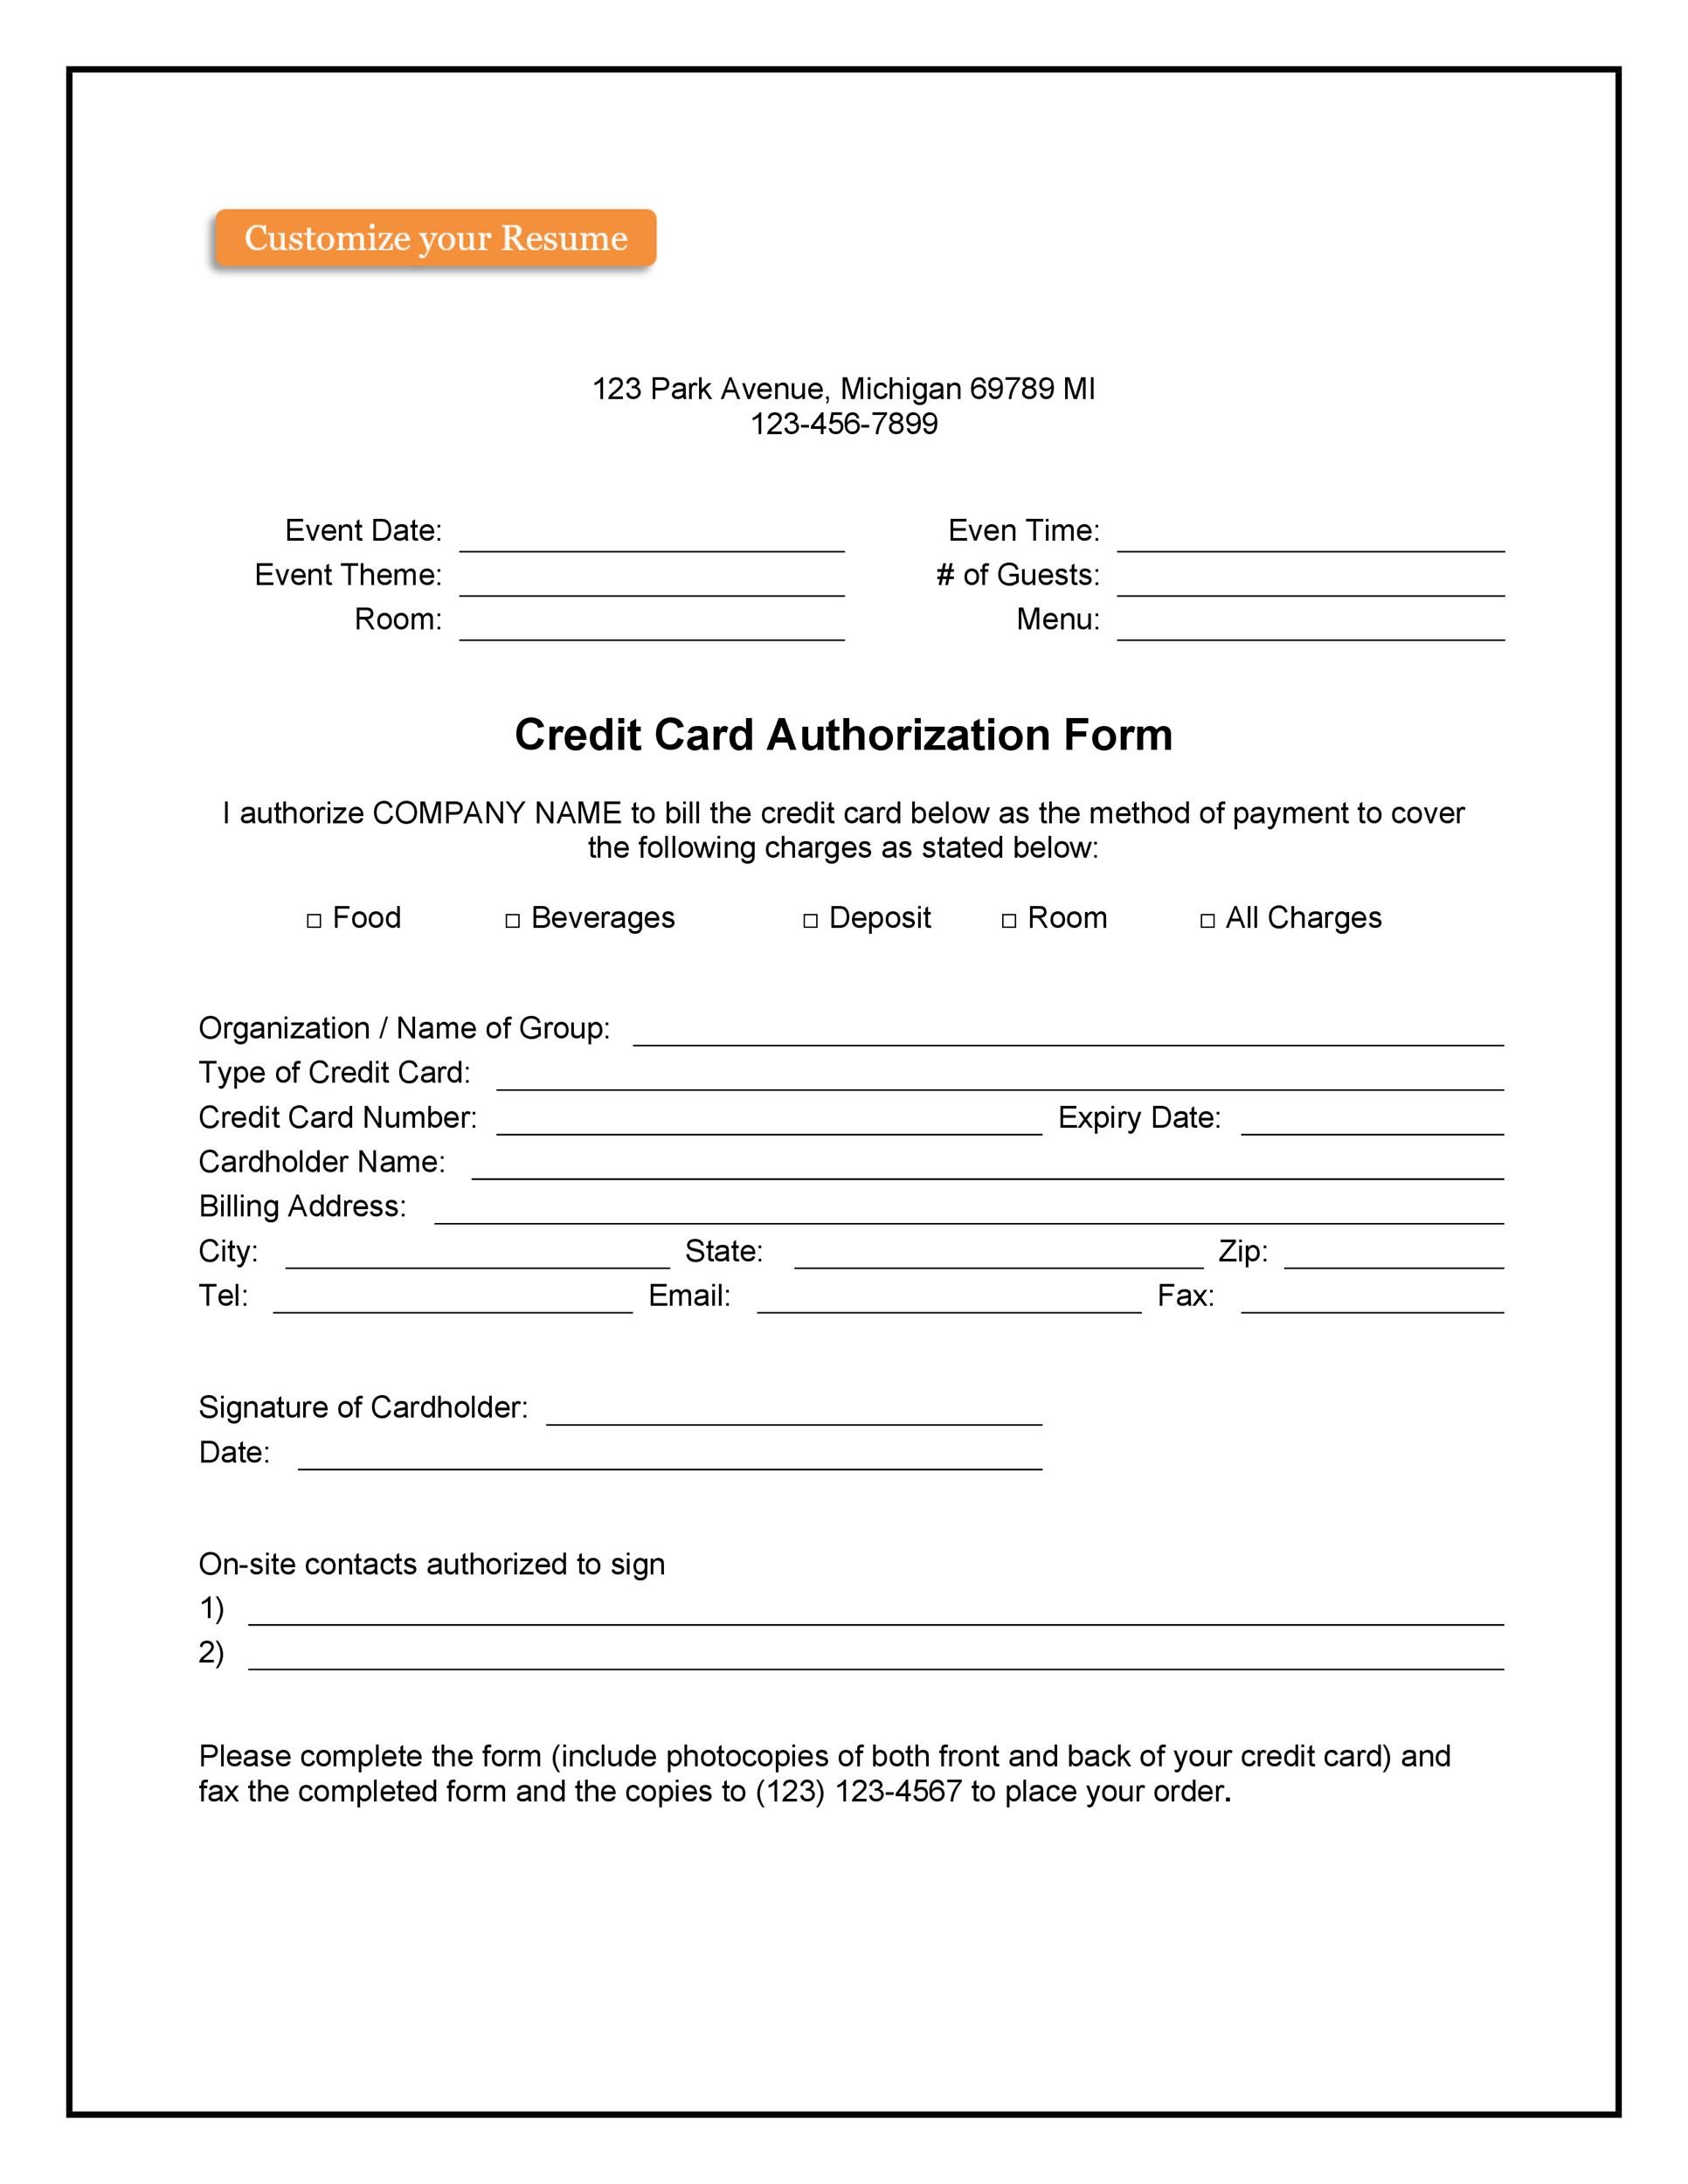 Printable Word Credit Card Authorization Form